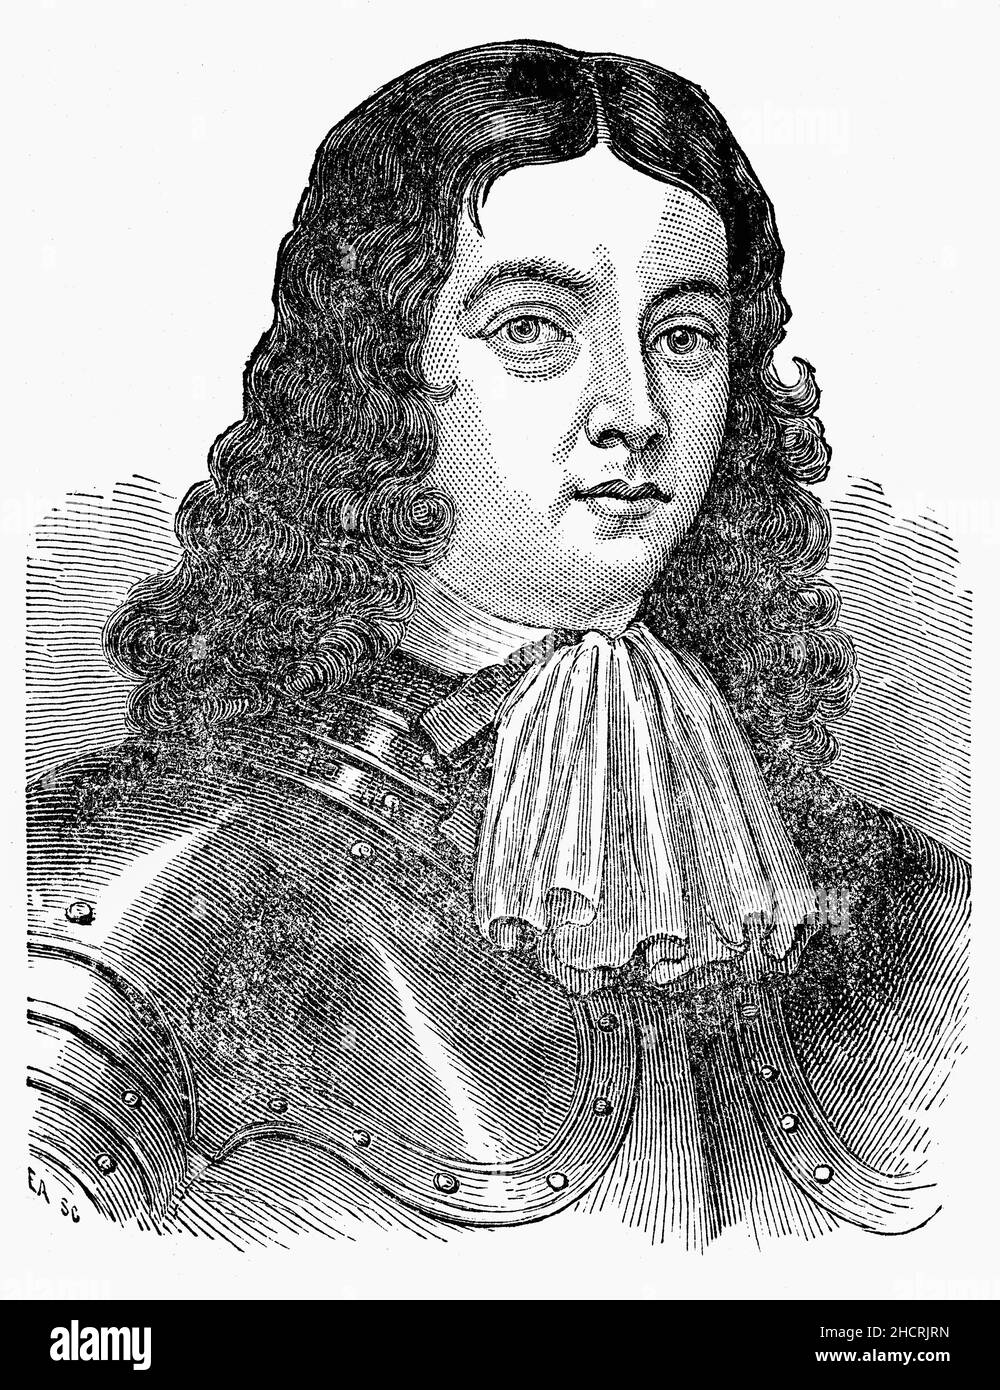 A late 19th Century portrait of William Penn (1644-1718) founded the Province of Pennsylvania, the British North American colony that became the U.S. state of Pennsylvania. Ahead of his time, Penn set forth the democratic principles that served as an inspiration for the United States Constitution. He also published a plan for a United States of Europe, 'European Dyet, Parliament or Estates.' Stock Photo